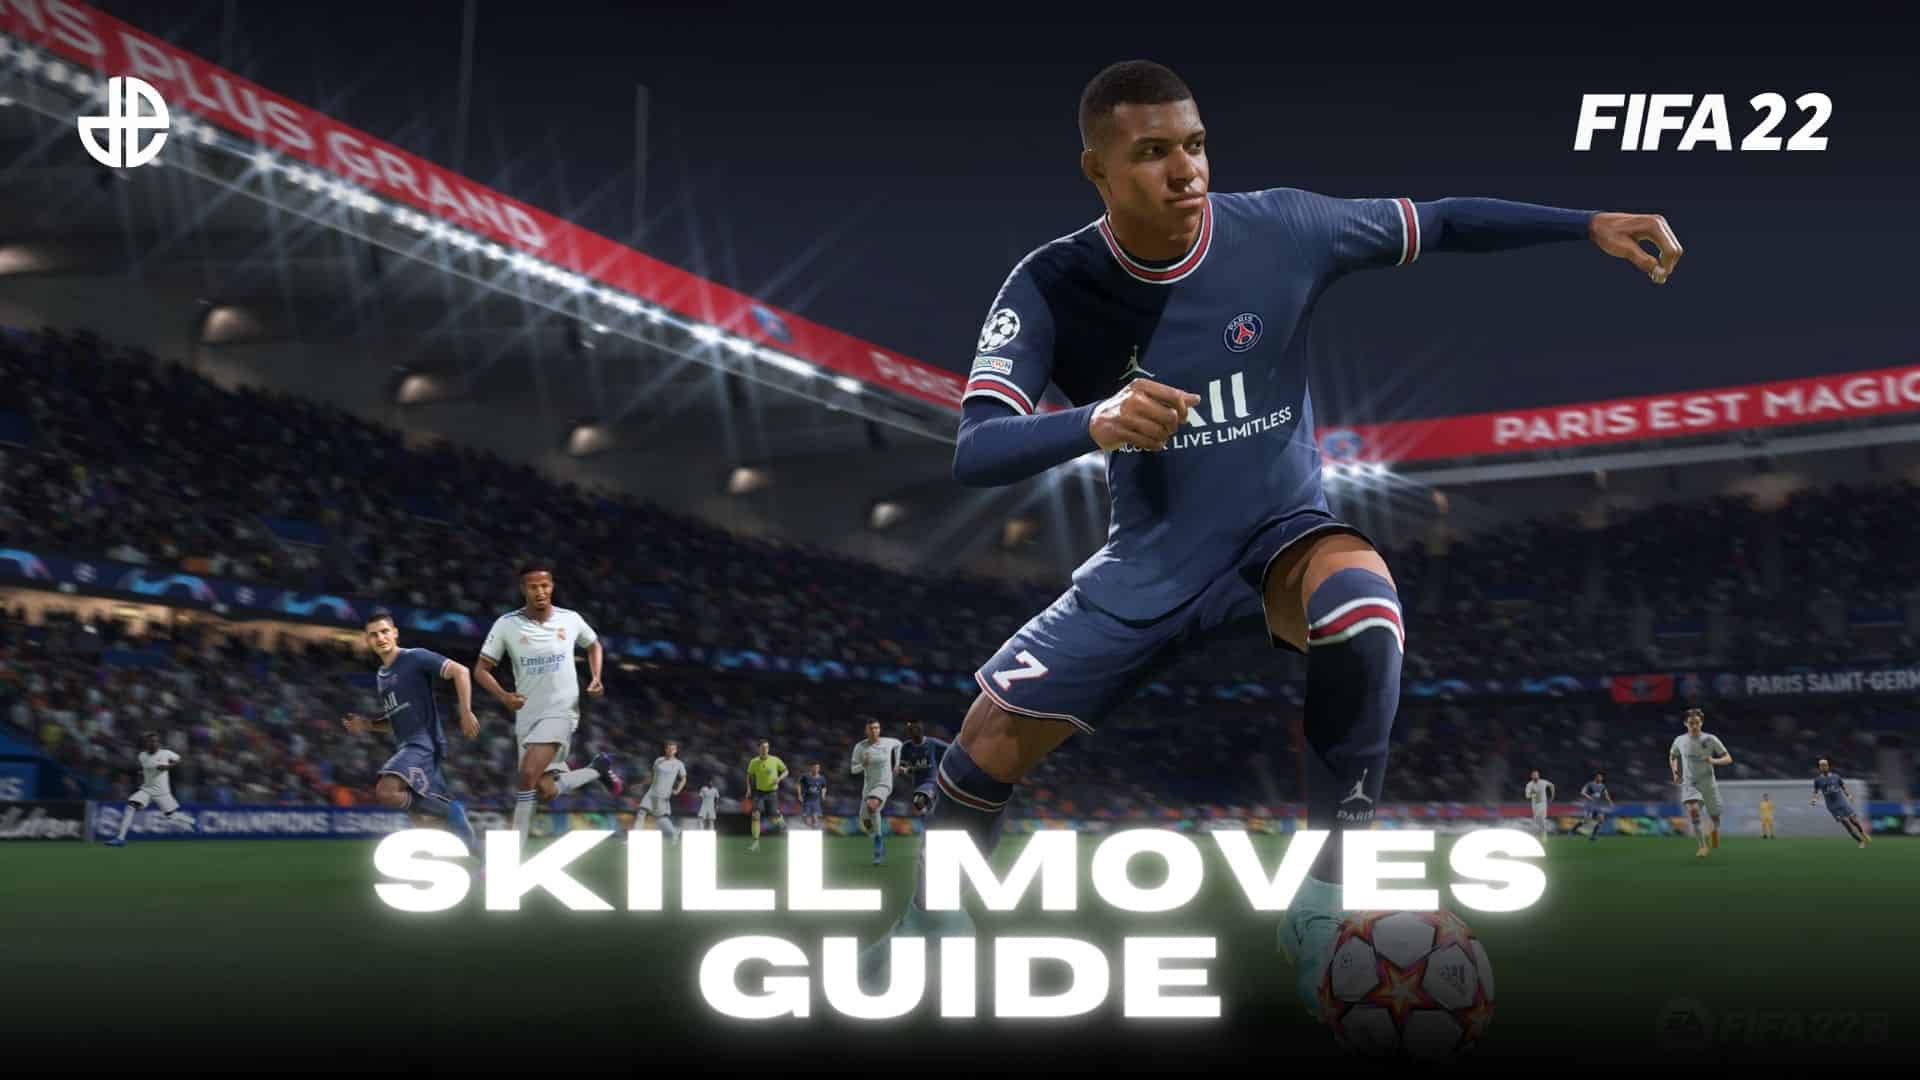 FIFA 22 Skill Moves guide: Best skills to learn, five-star